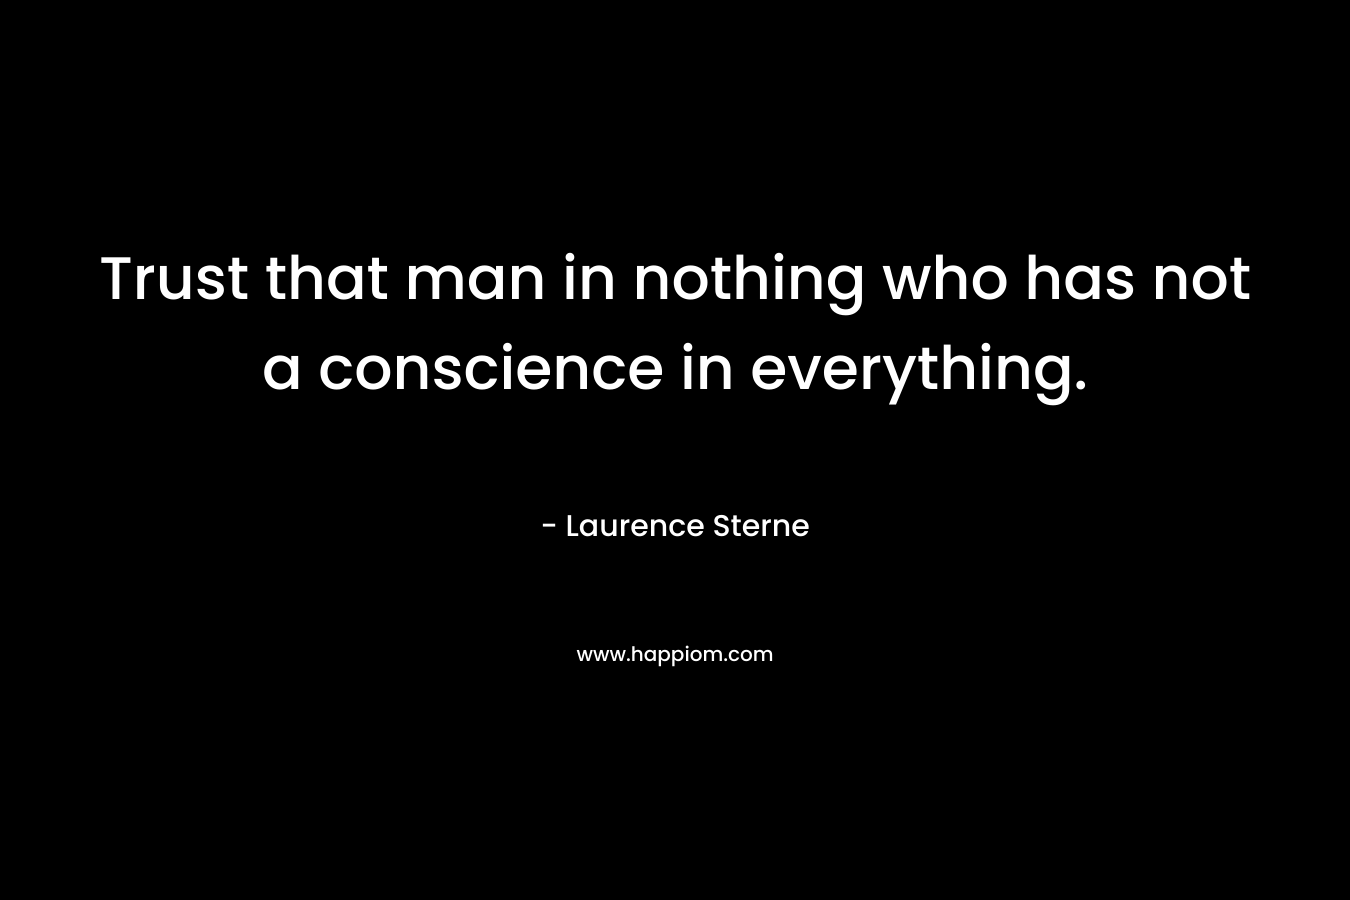 Trust that man in nothing who has not a conscience in everything. – Laurence Sterne